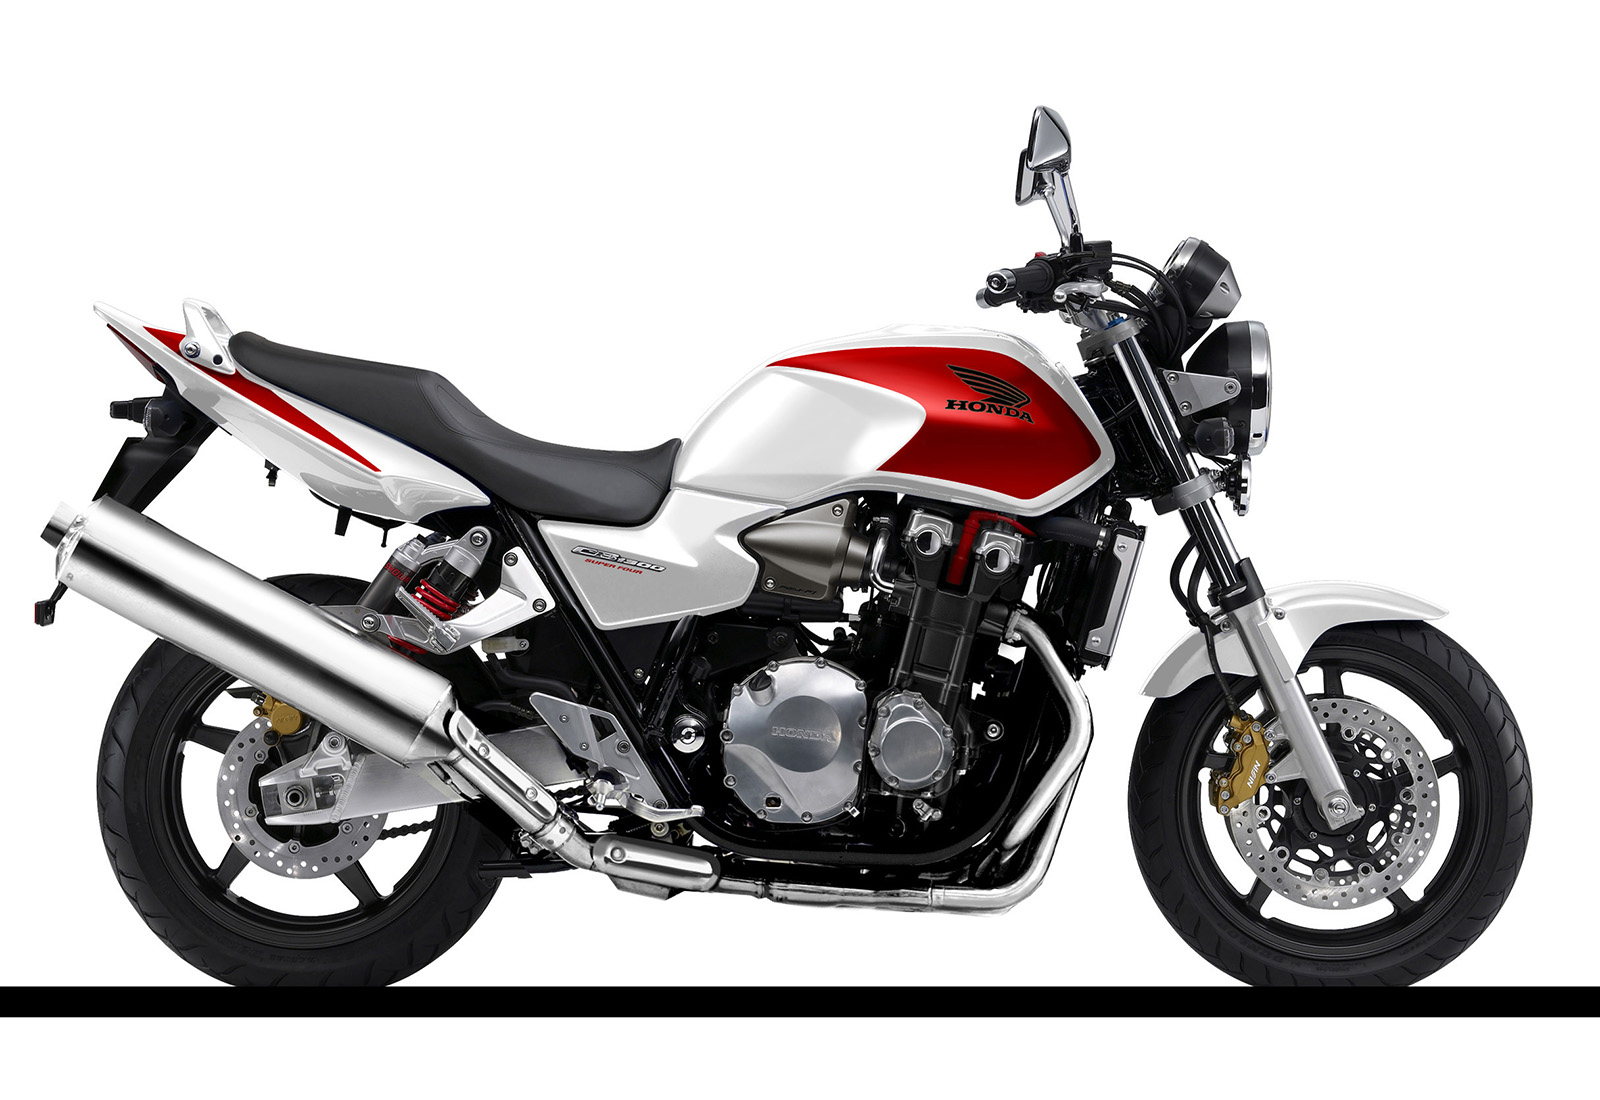 CB1300 SUPER FOUR（2008年）ファイナルスケッチ